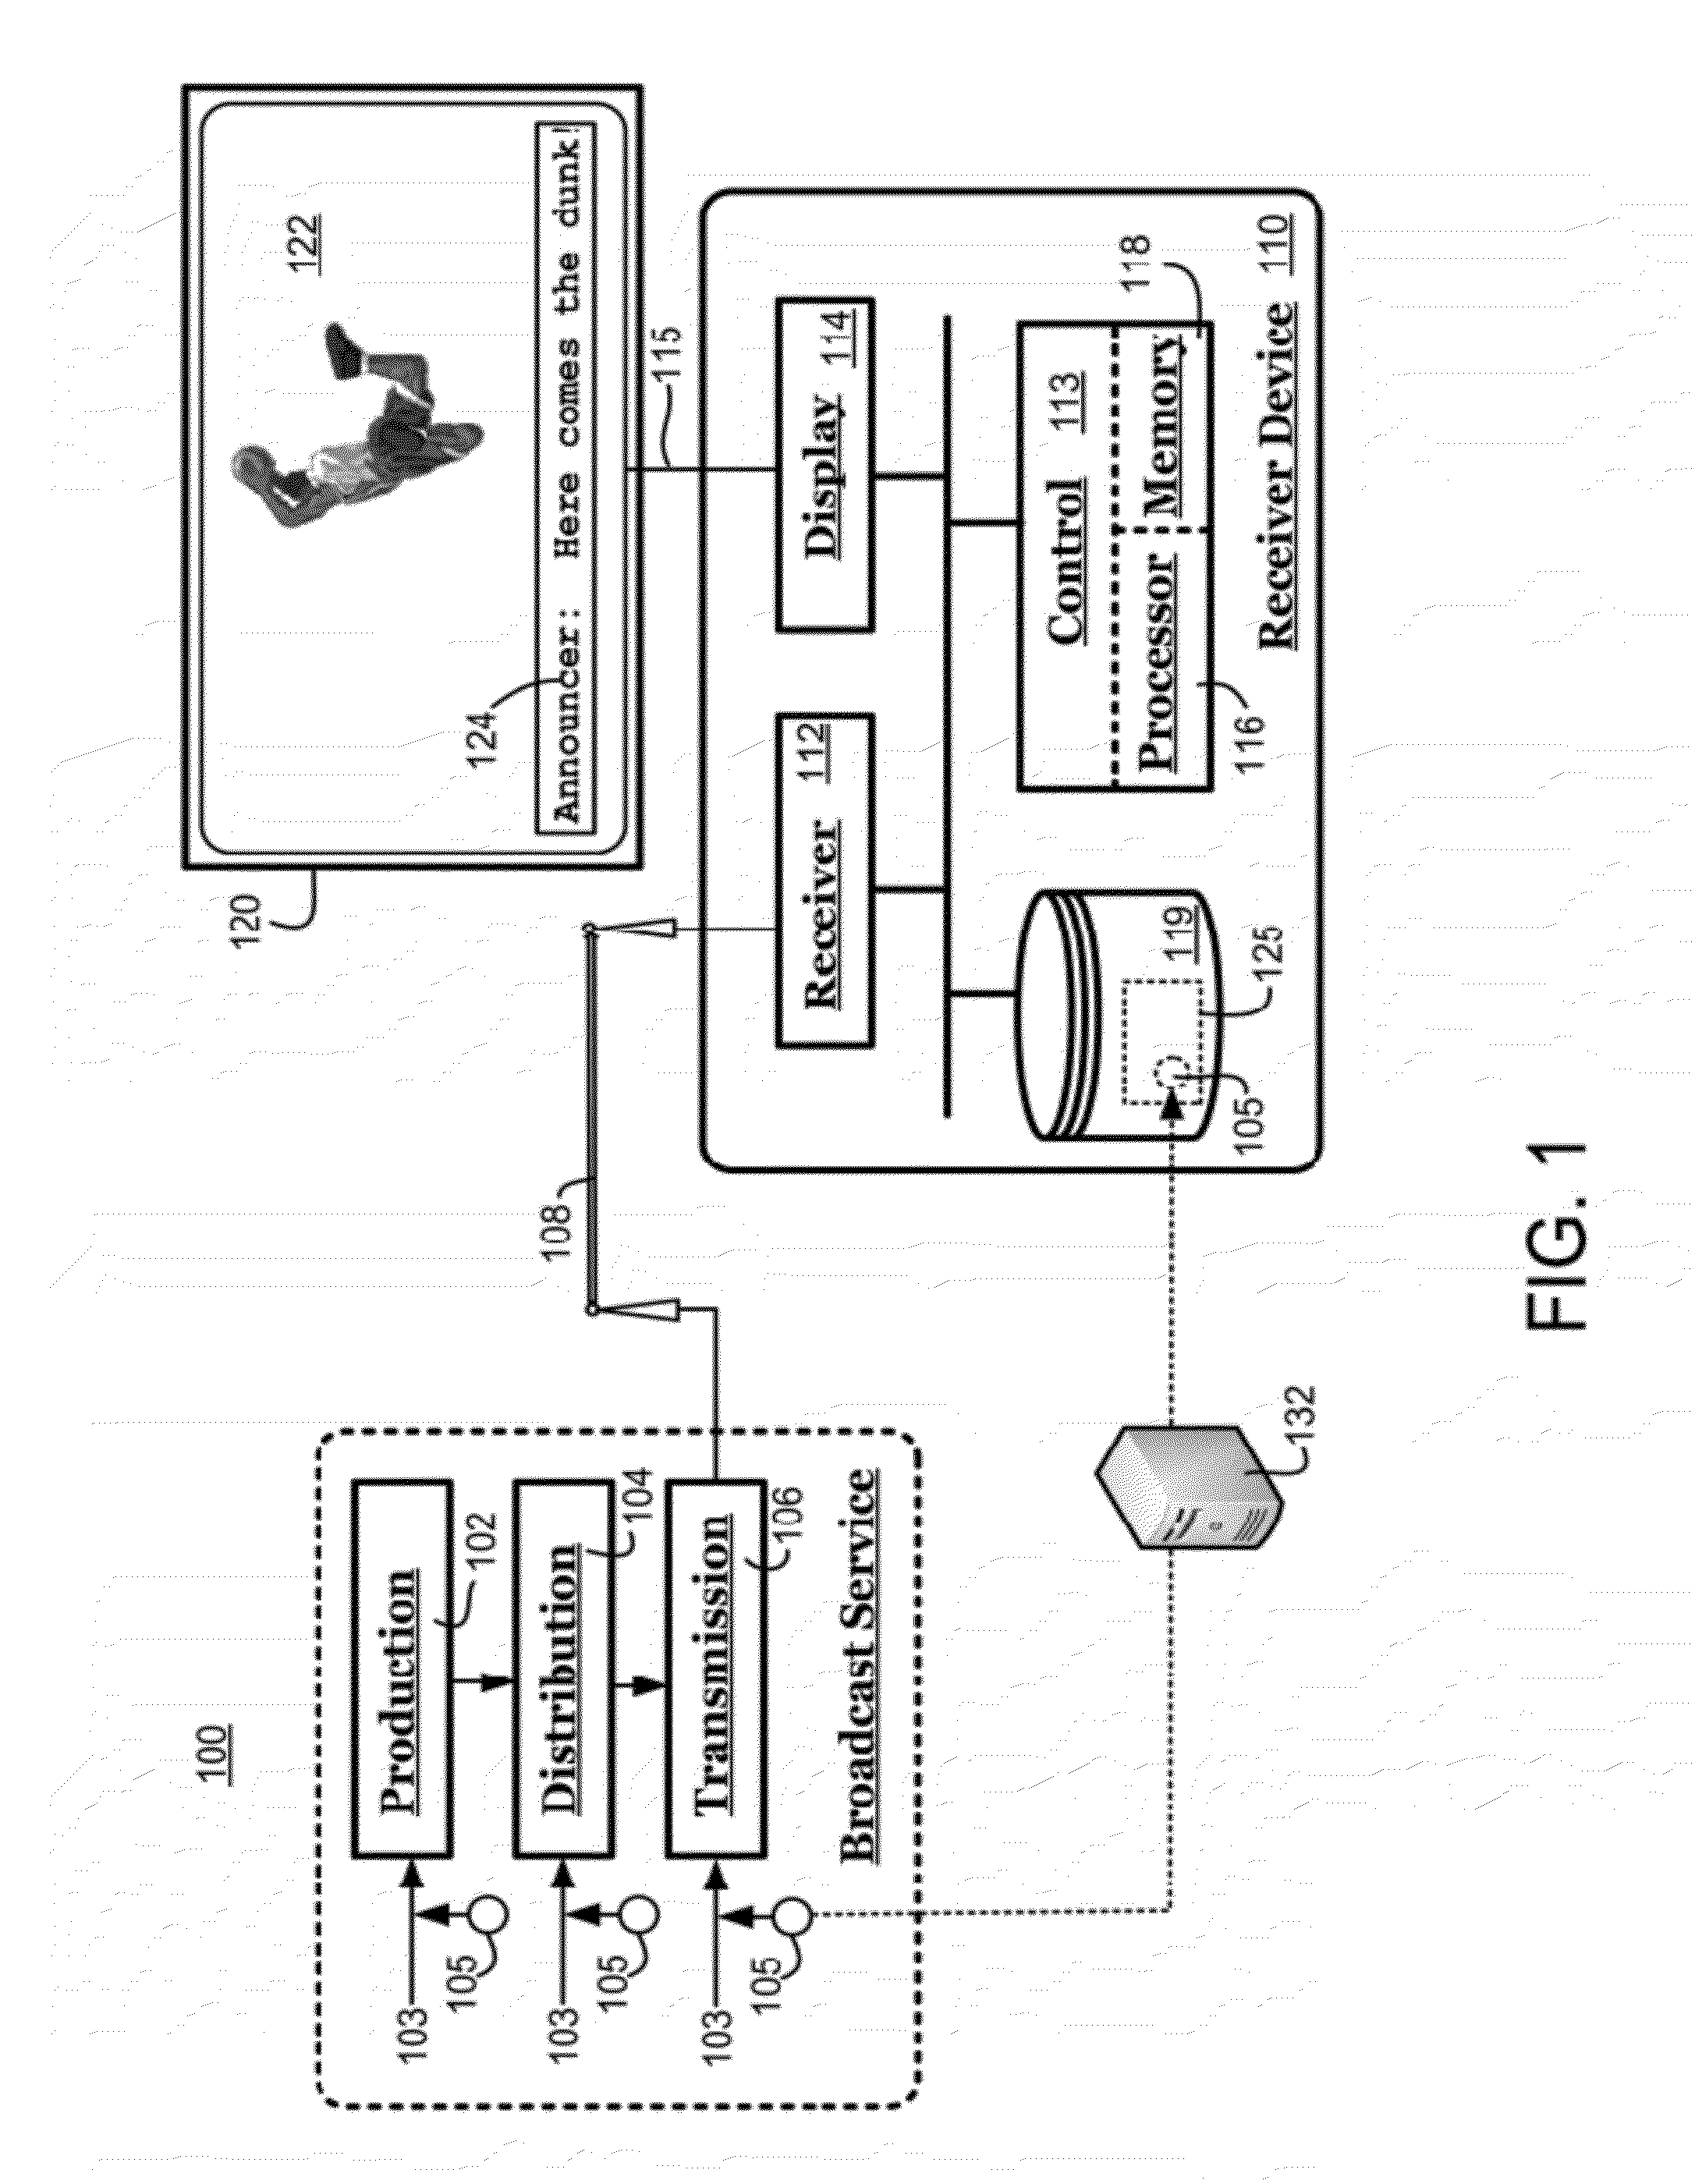 Systems and methods for processing timed text in video programming